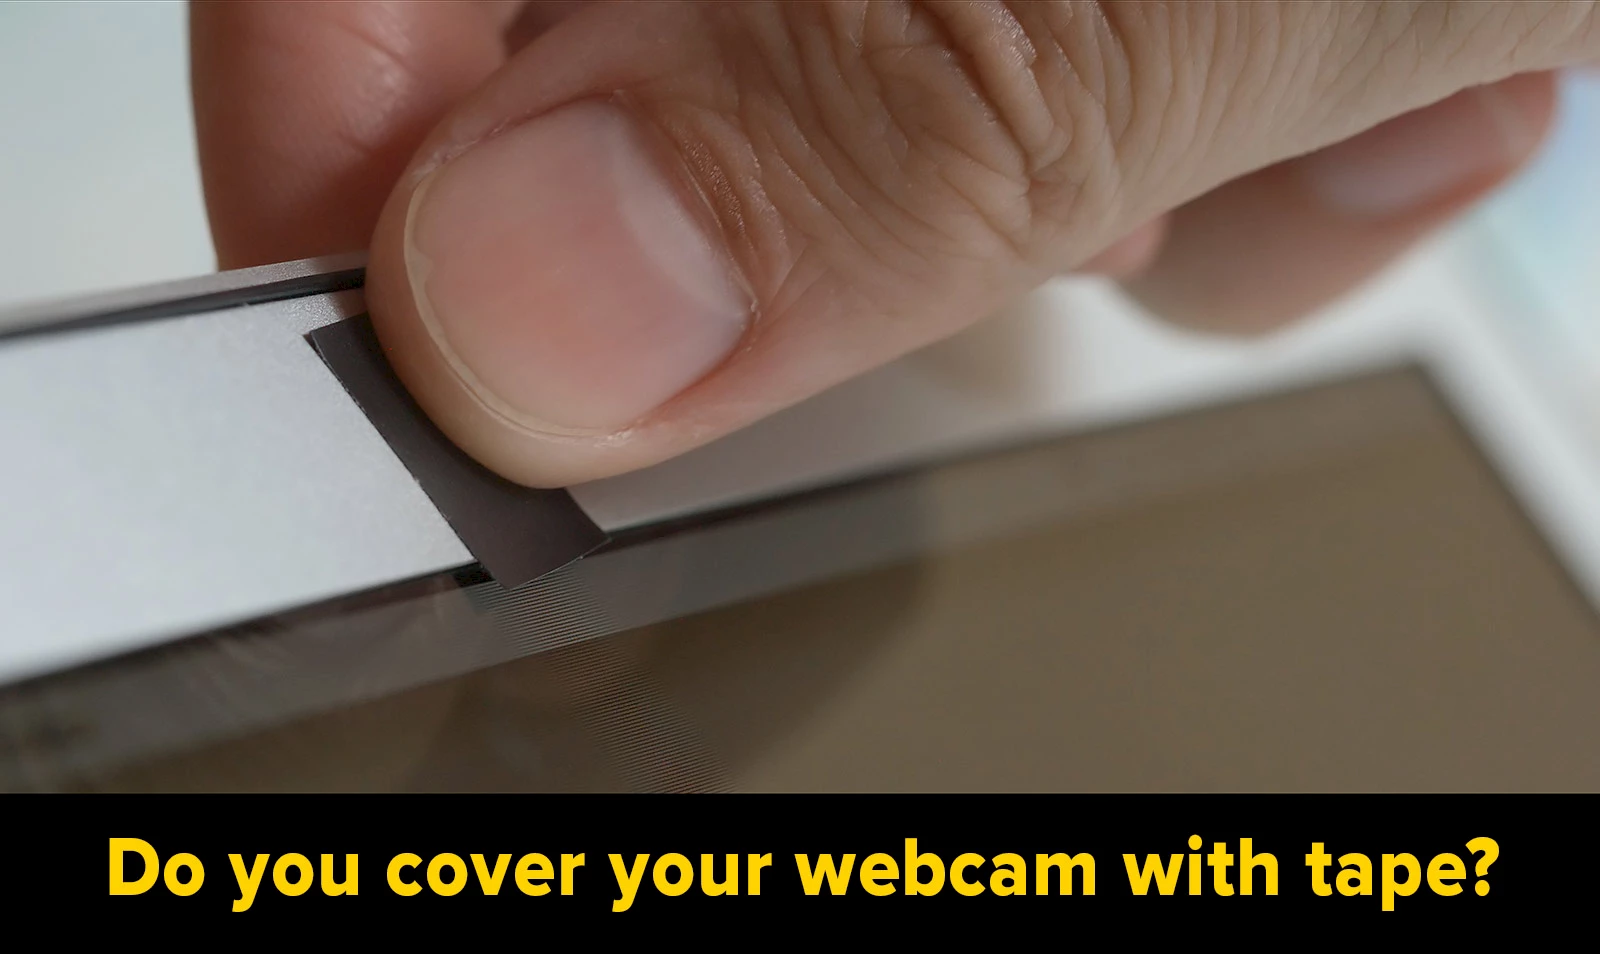 Do you cover your webcam with tape?